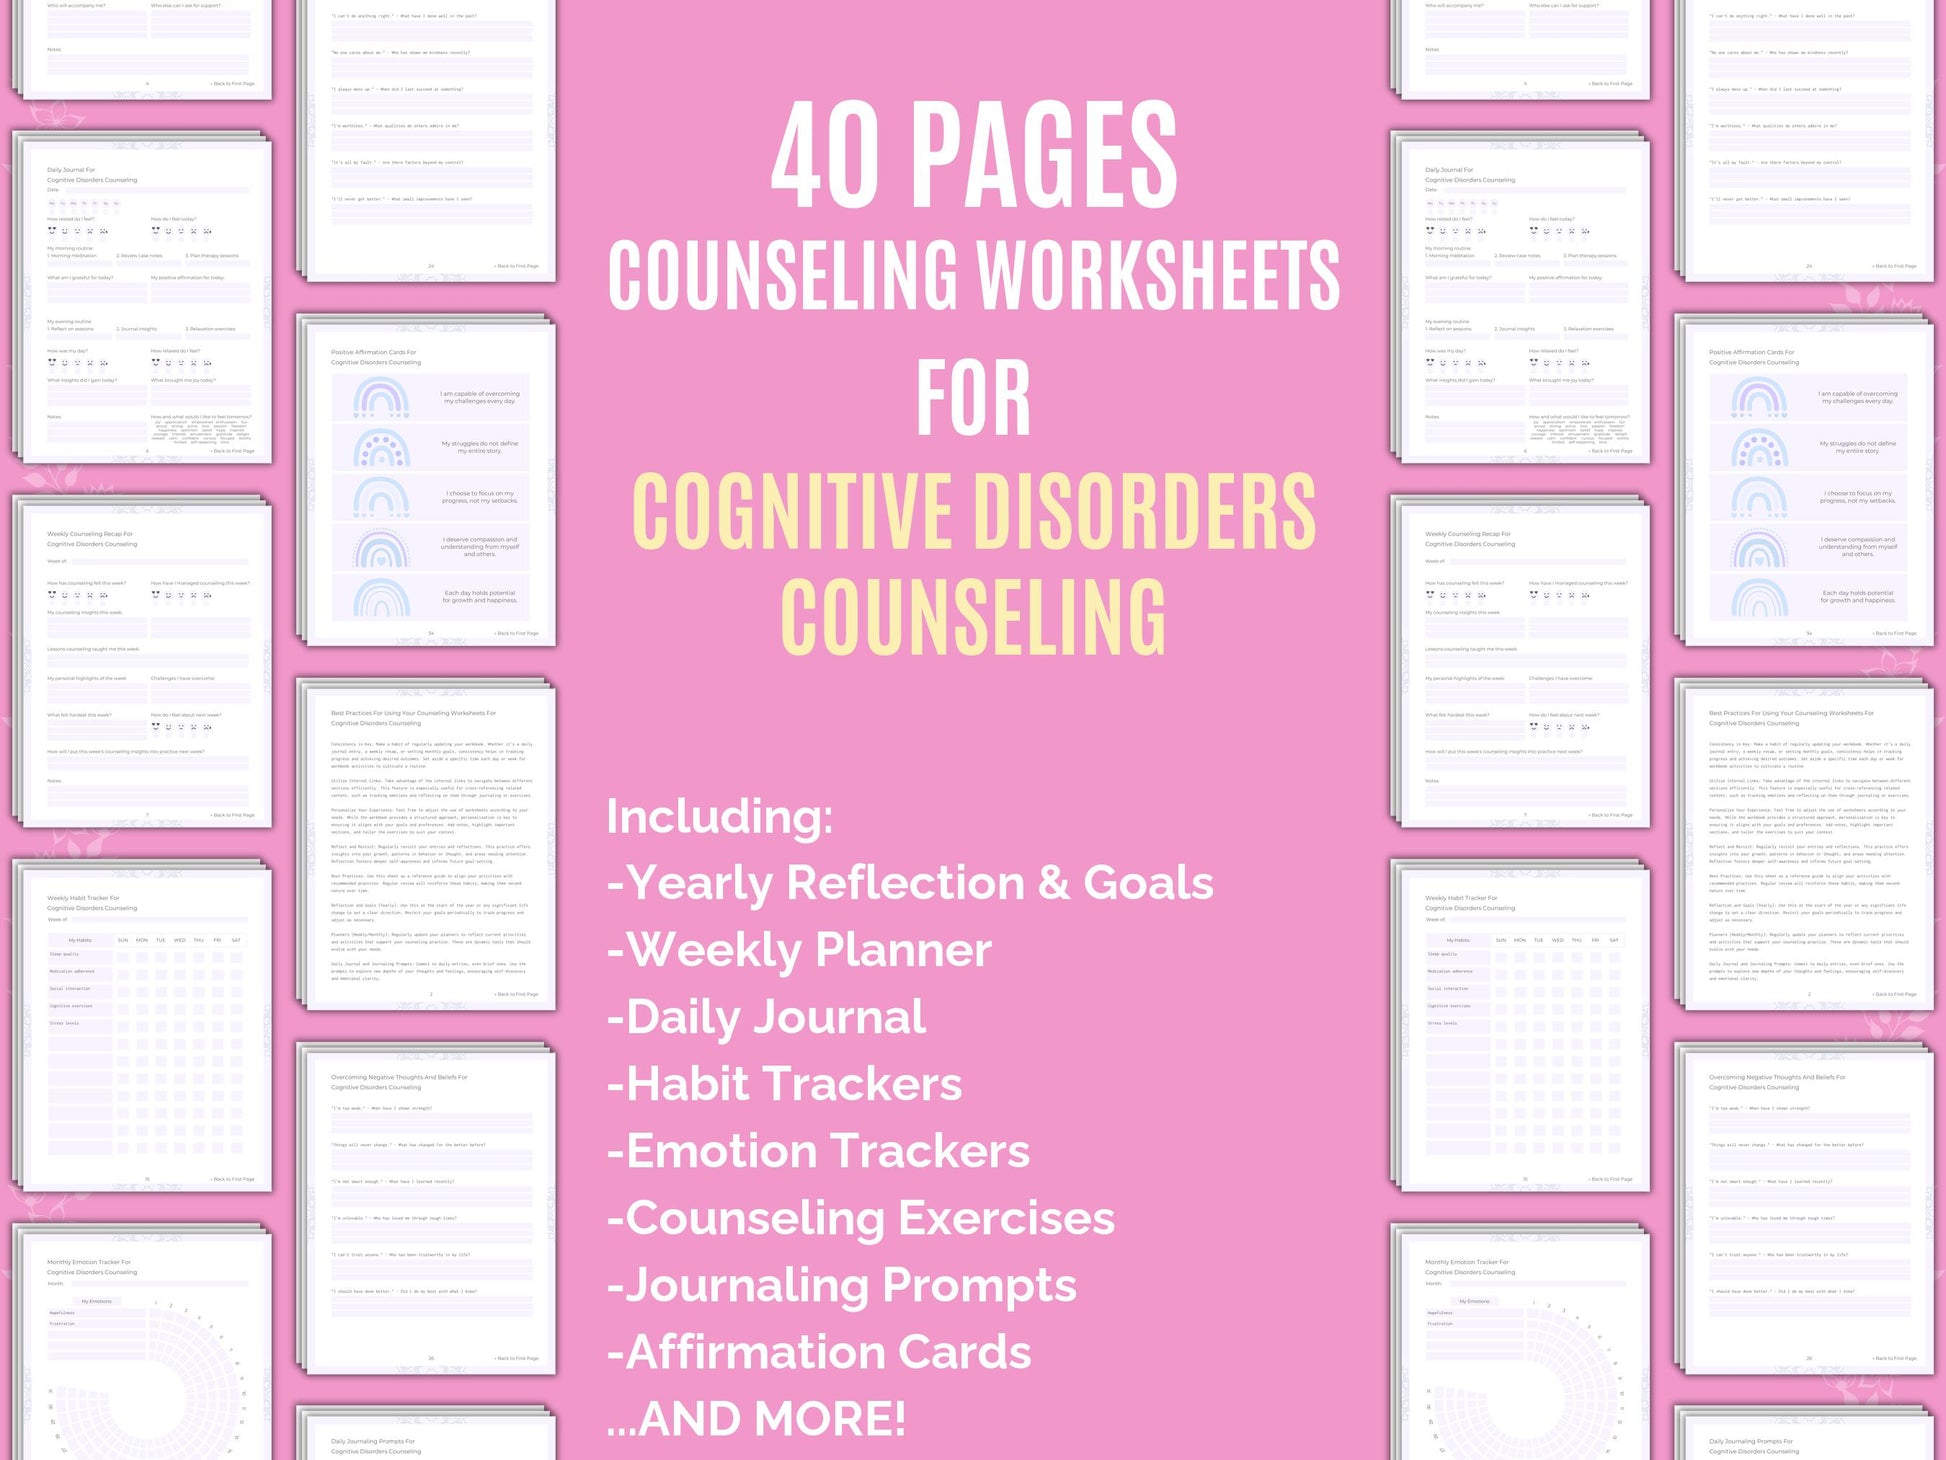 Cognitive Disorders Counseling